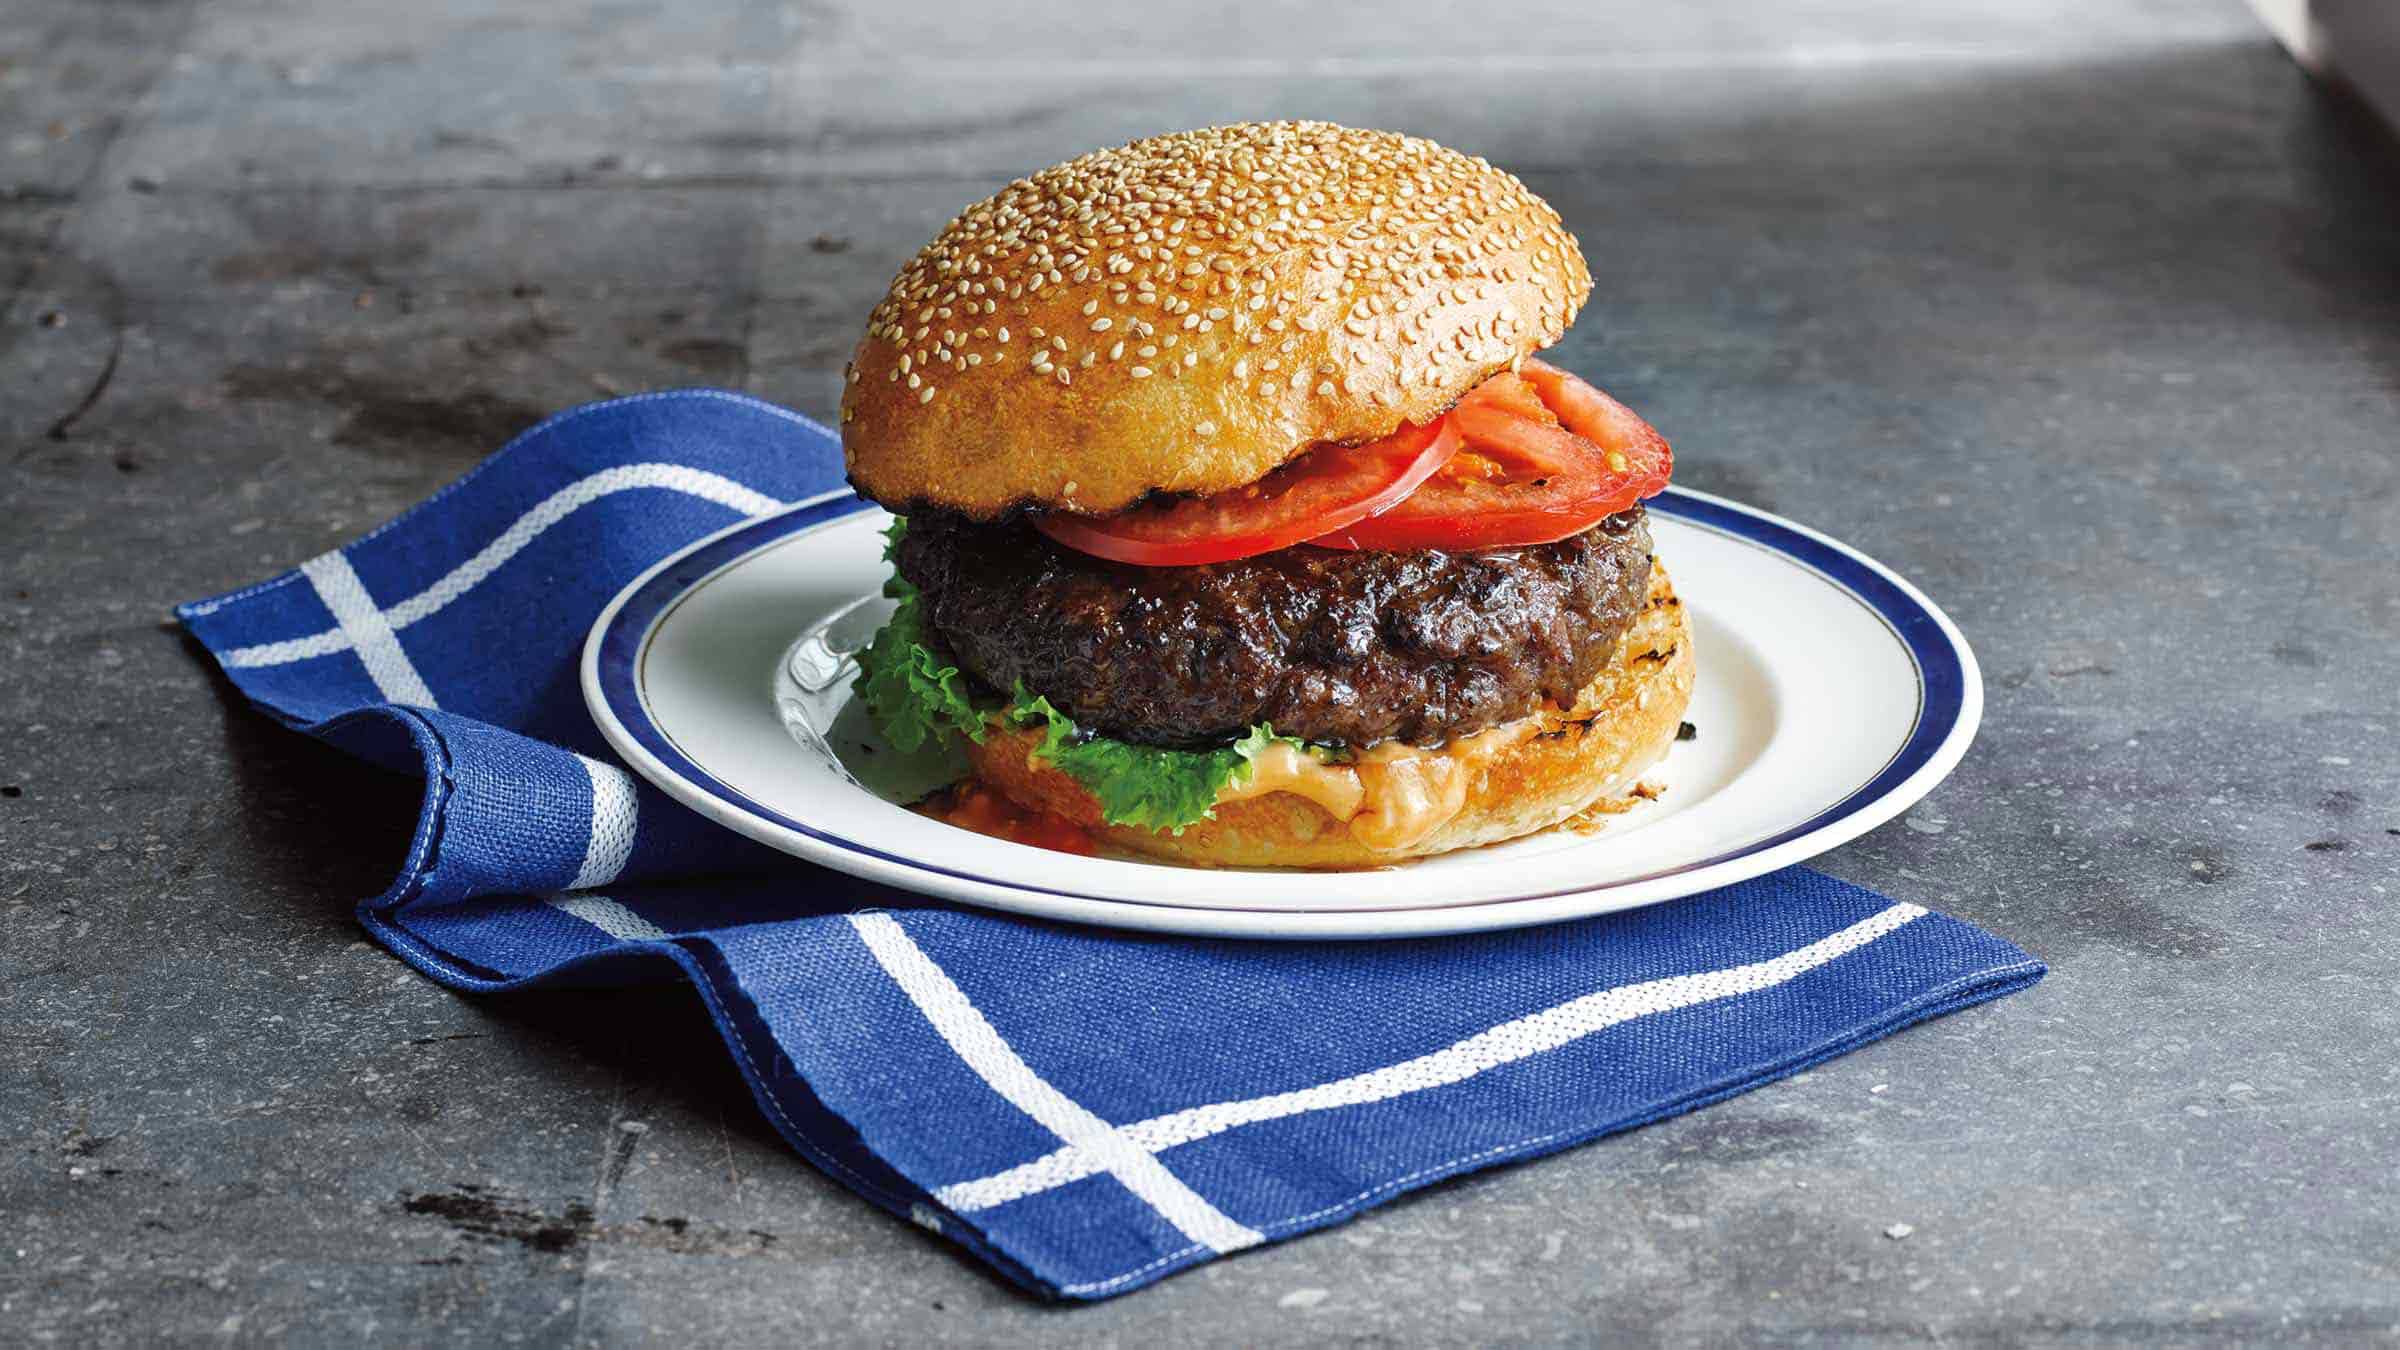 How to Make the Juiciest Burgers